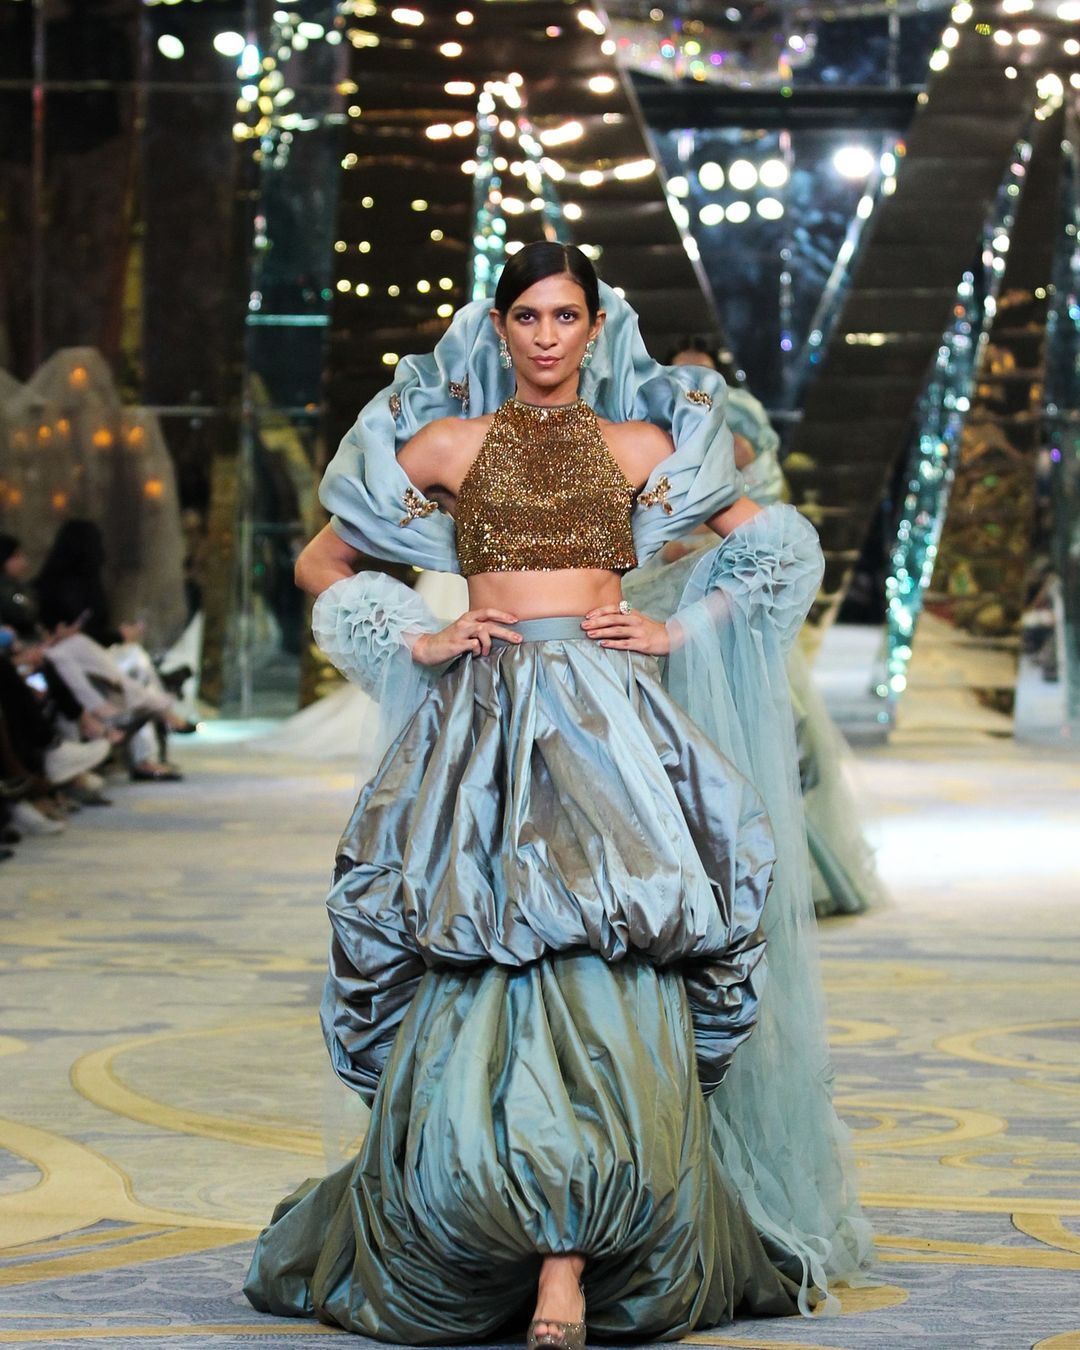 Manish Malhotra Heralds In The Era Of The Bold Bride With His Latest Couture Collection: Drama after dark. Photo Credit: www.instagram.com